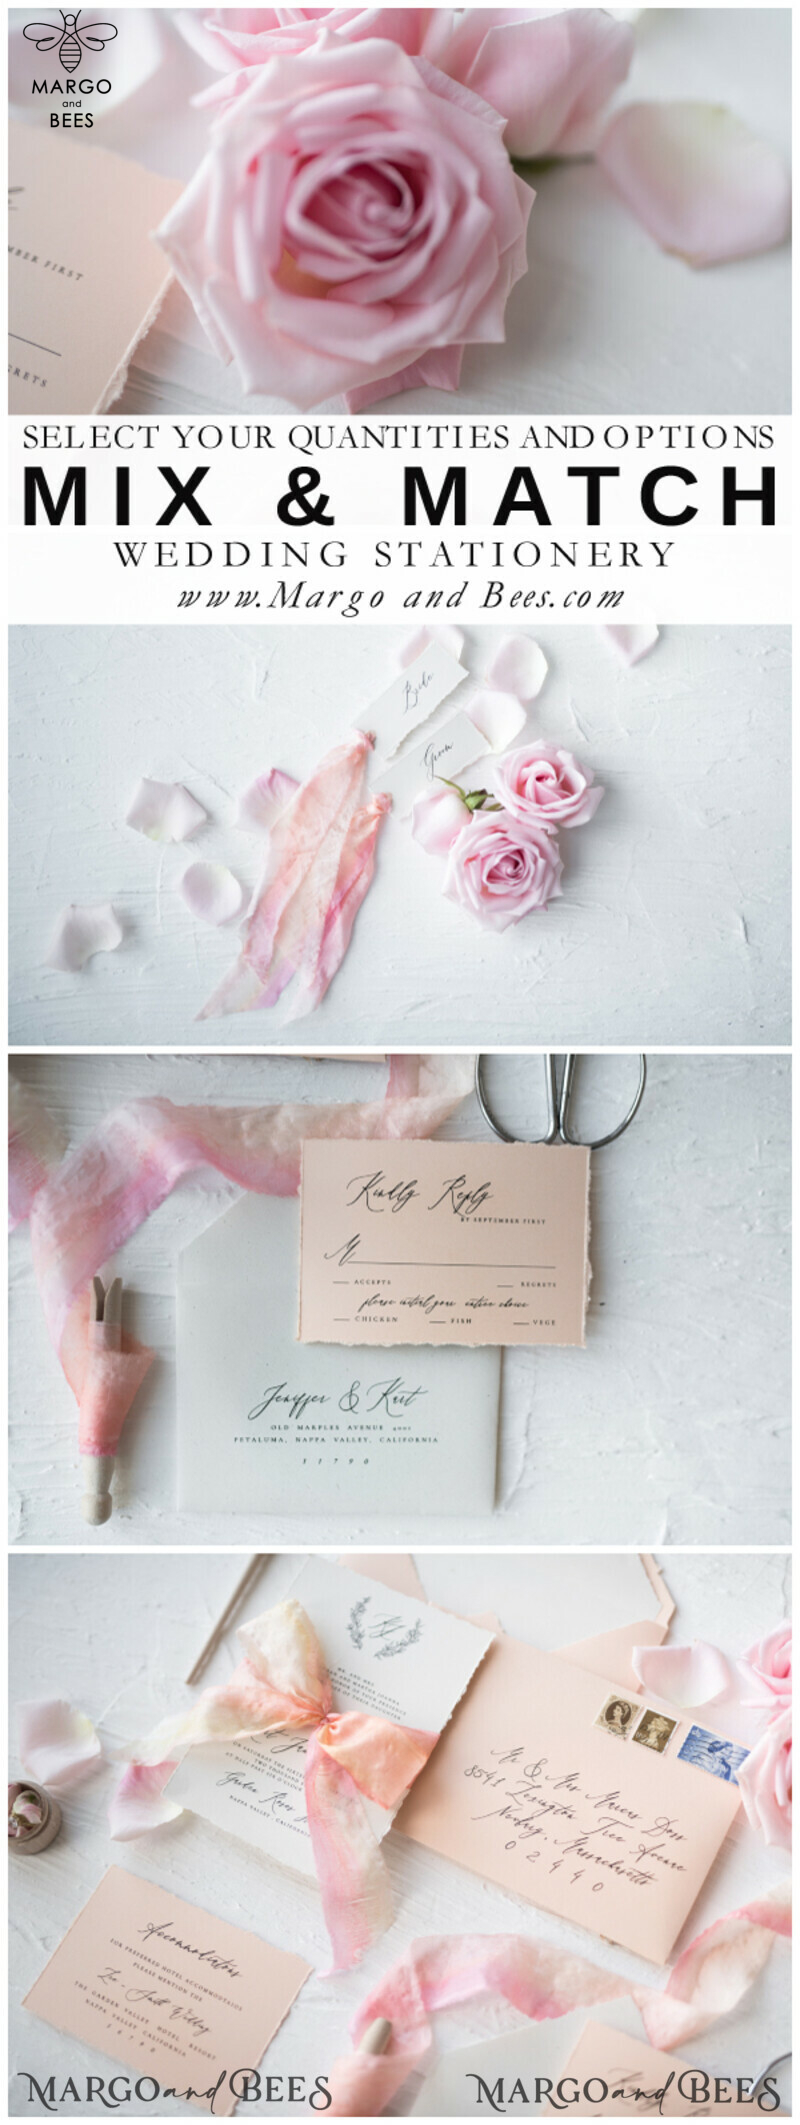 Elegant Handmade Wedding Invitation Suite: Minimalistic Peach and White, Vintage Inspired with Hand Dyed Ribbon-11